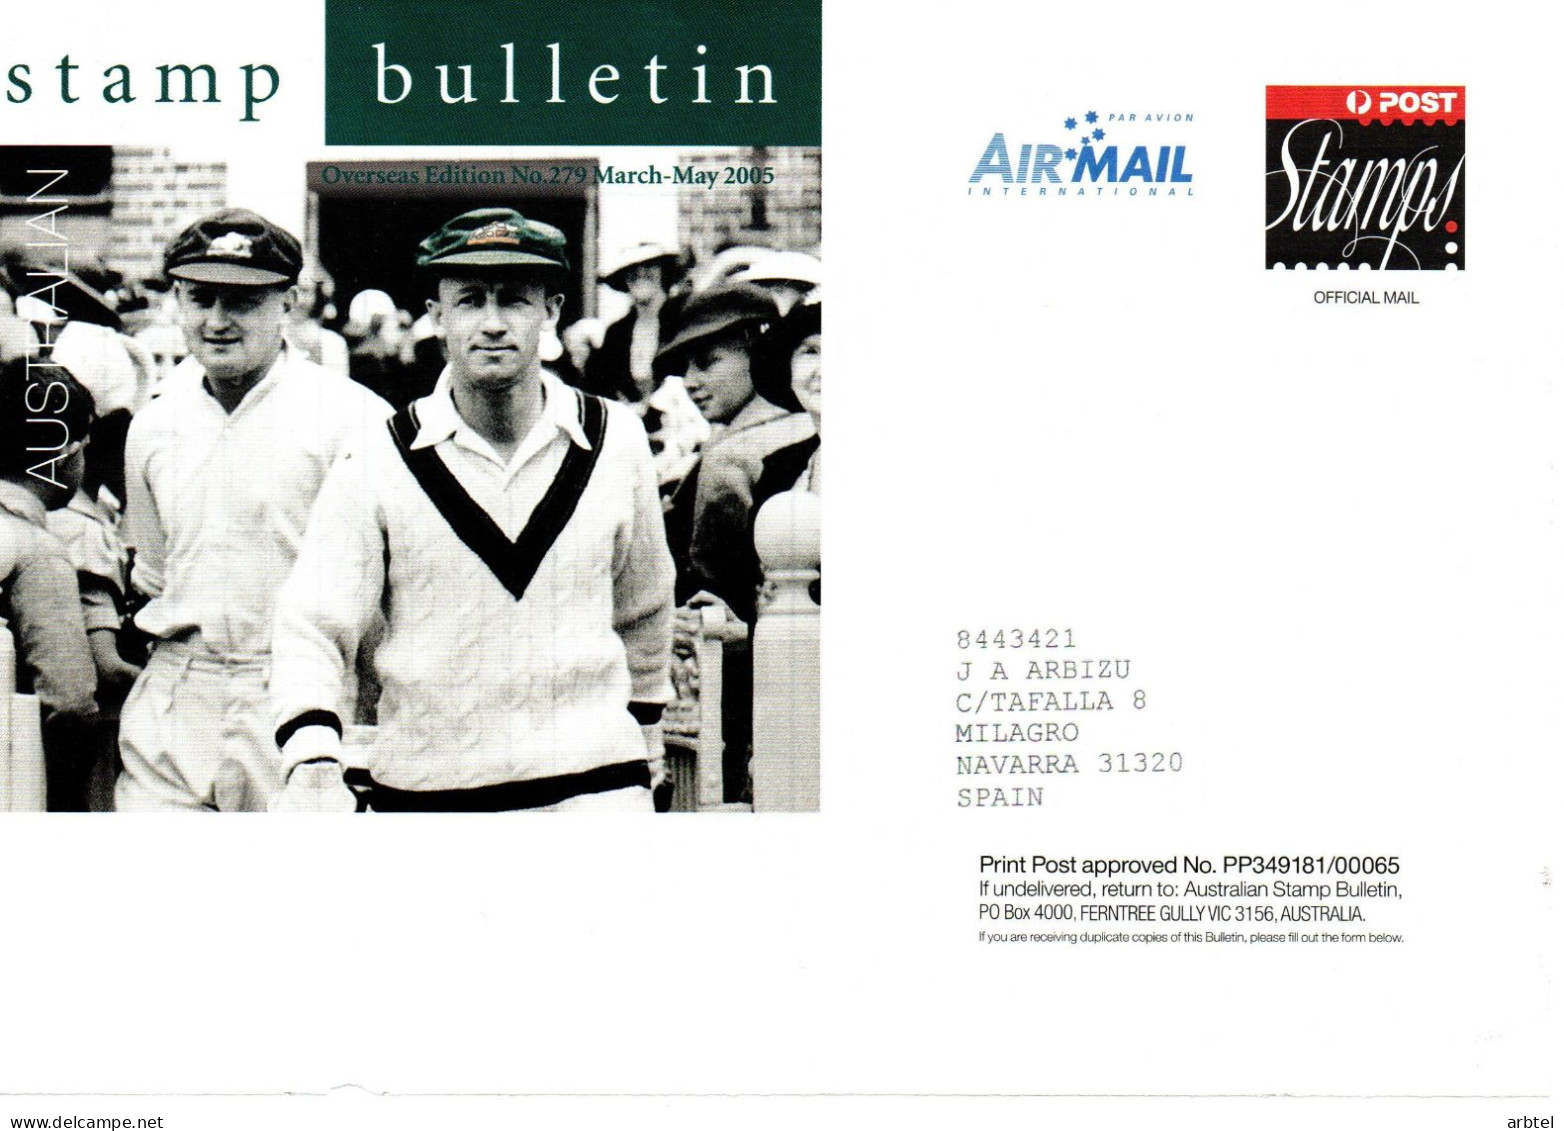 AUSTRALIA STAMP BULLETIN FRONTAL FRONT OFFICIAL MAIL 2005 AUSTRALIAN SPORT - Lettres & Documents